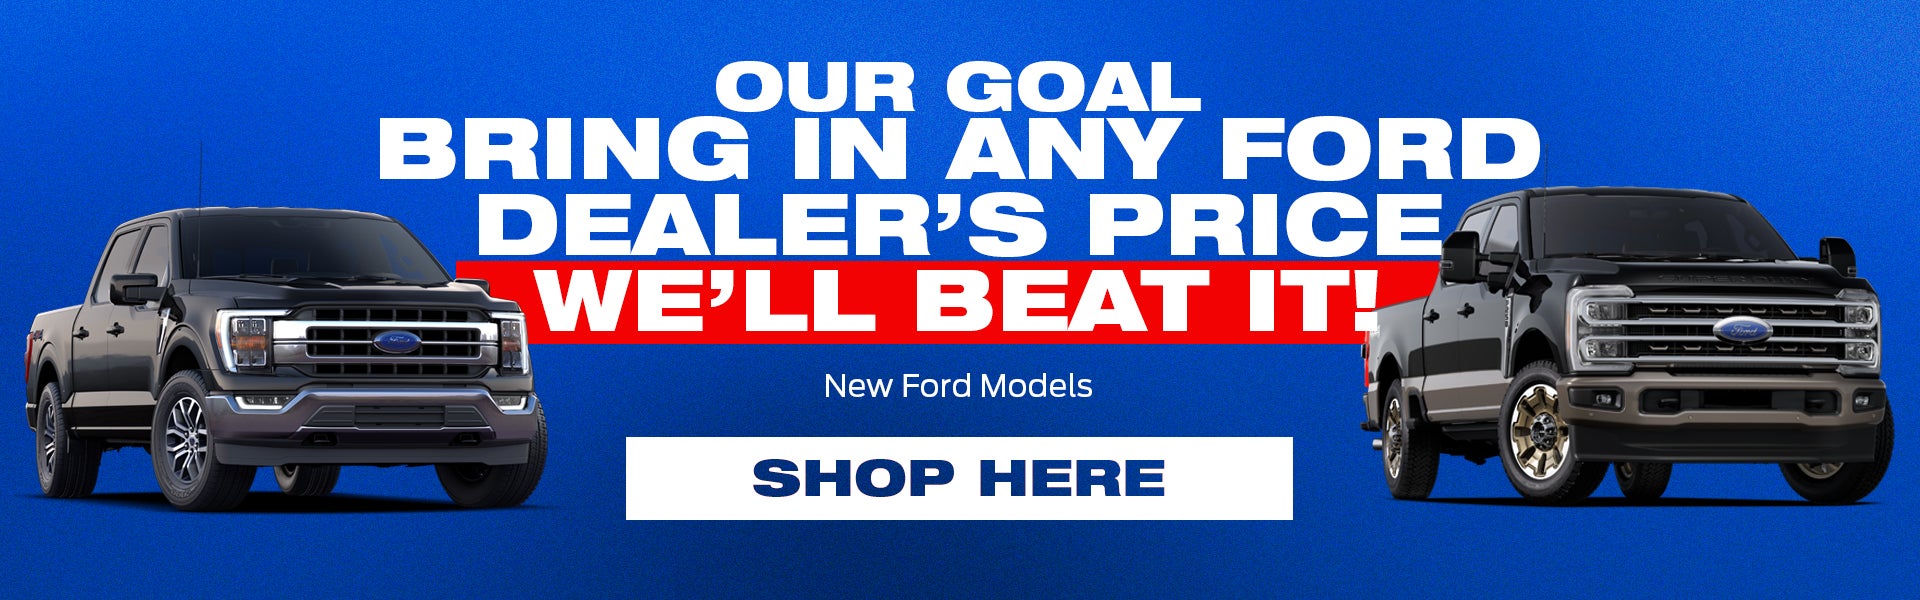 Bring in Any Ford Dealer's Price We'll Beat It 